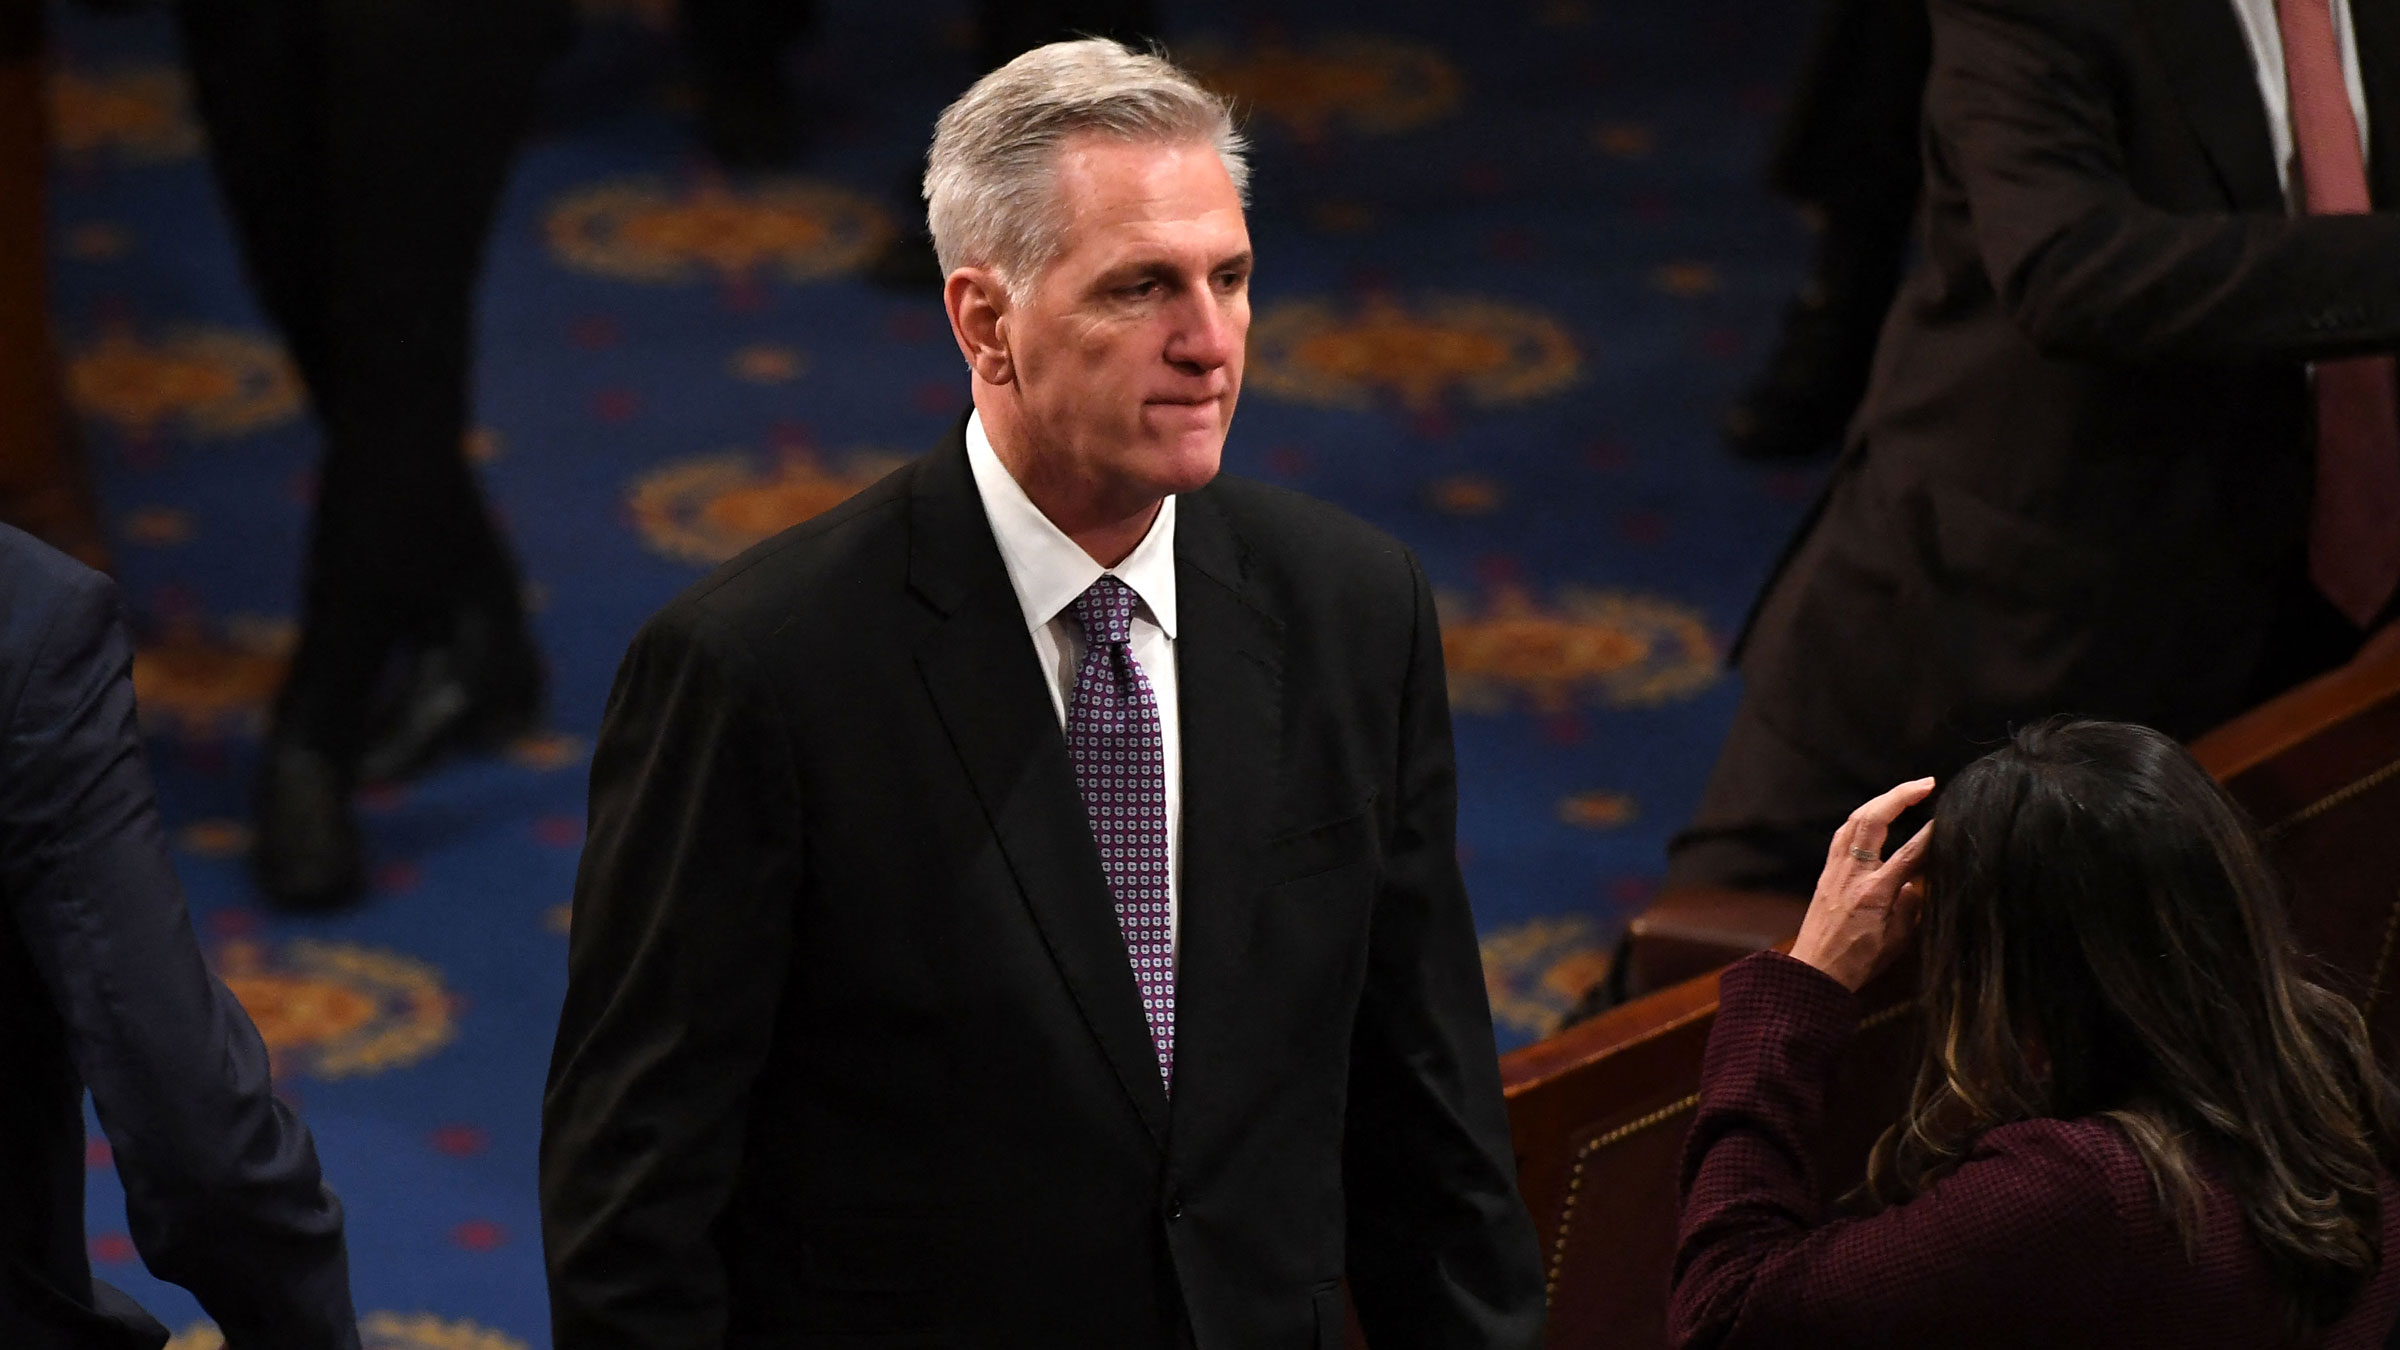 Kevin McCarthy arrives in the House chamber on Wednesday.